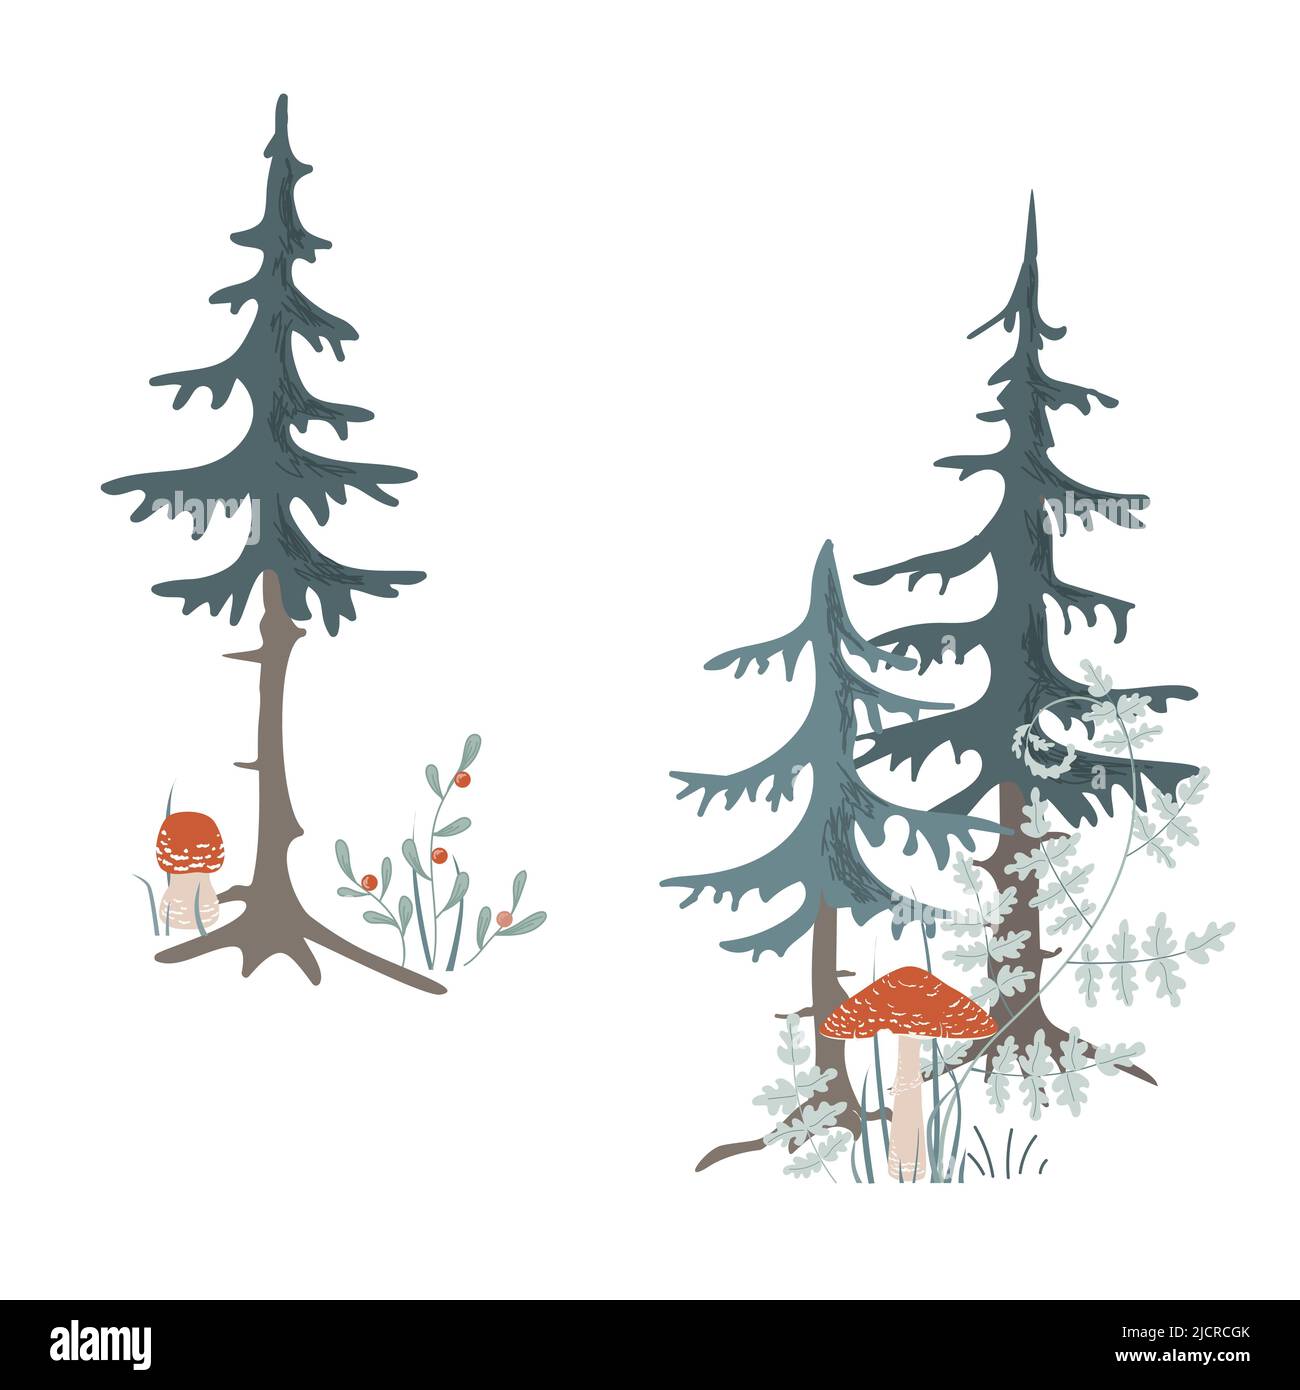 Forest isolated composition. Fir trees, herbs, and mushrooms. Design for kids cards, forest card invitation, prints. Banner decor design vector Stock Vector